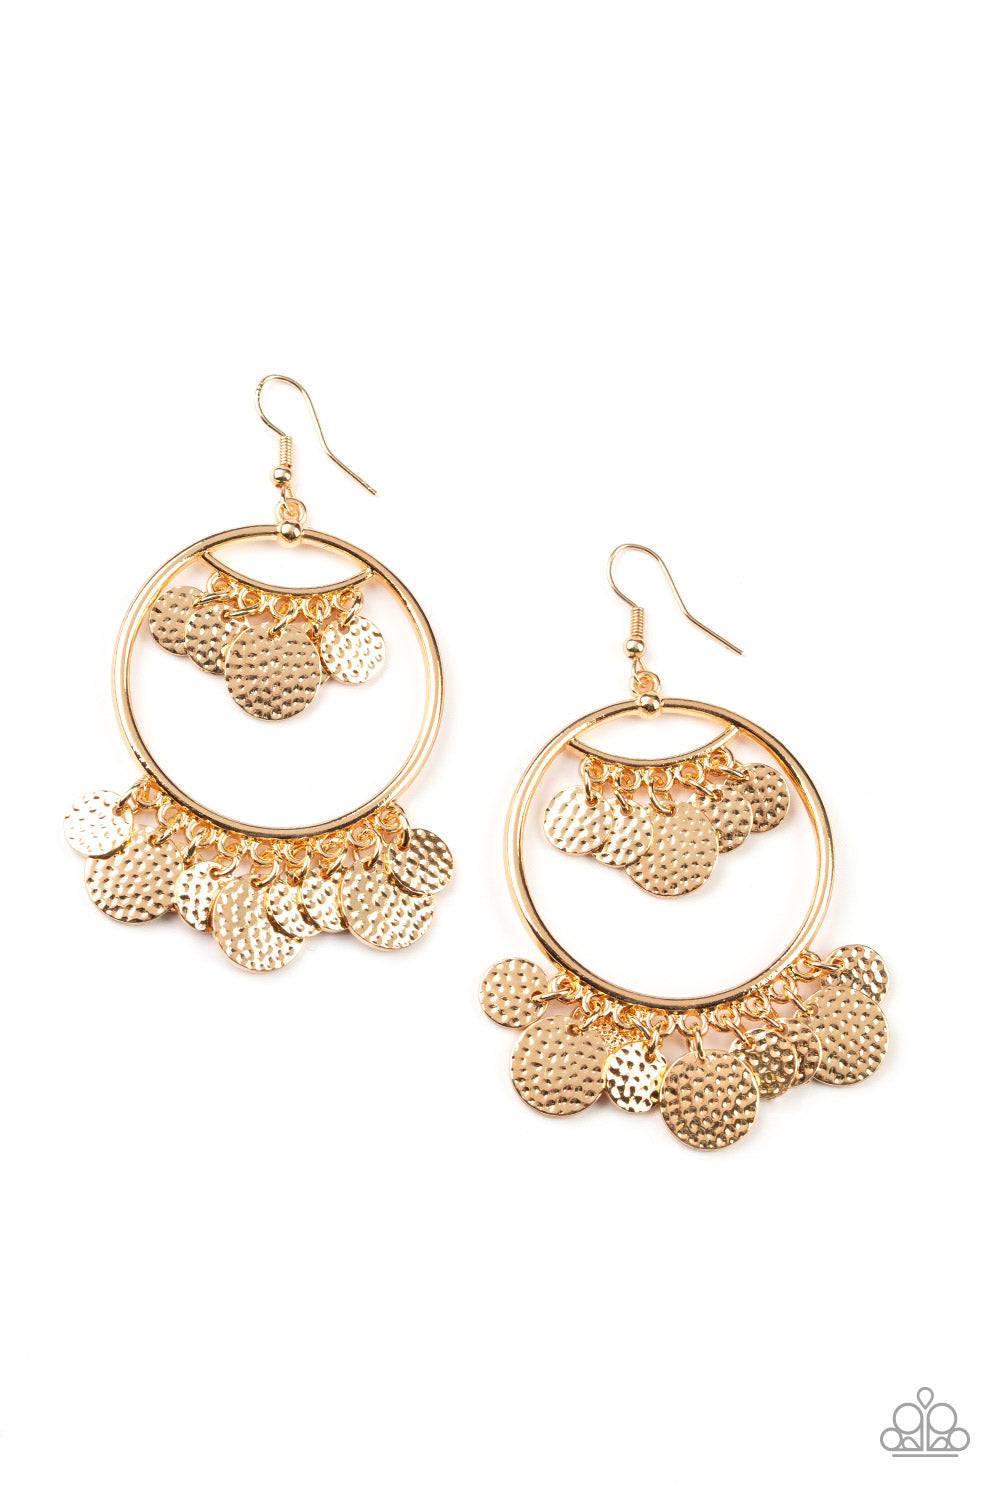 Paparazzi Earrings - ALL-CHIME High -Gold